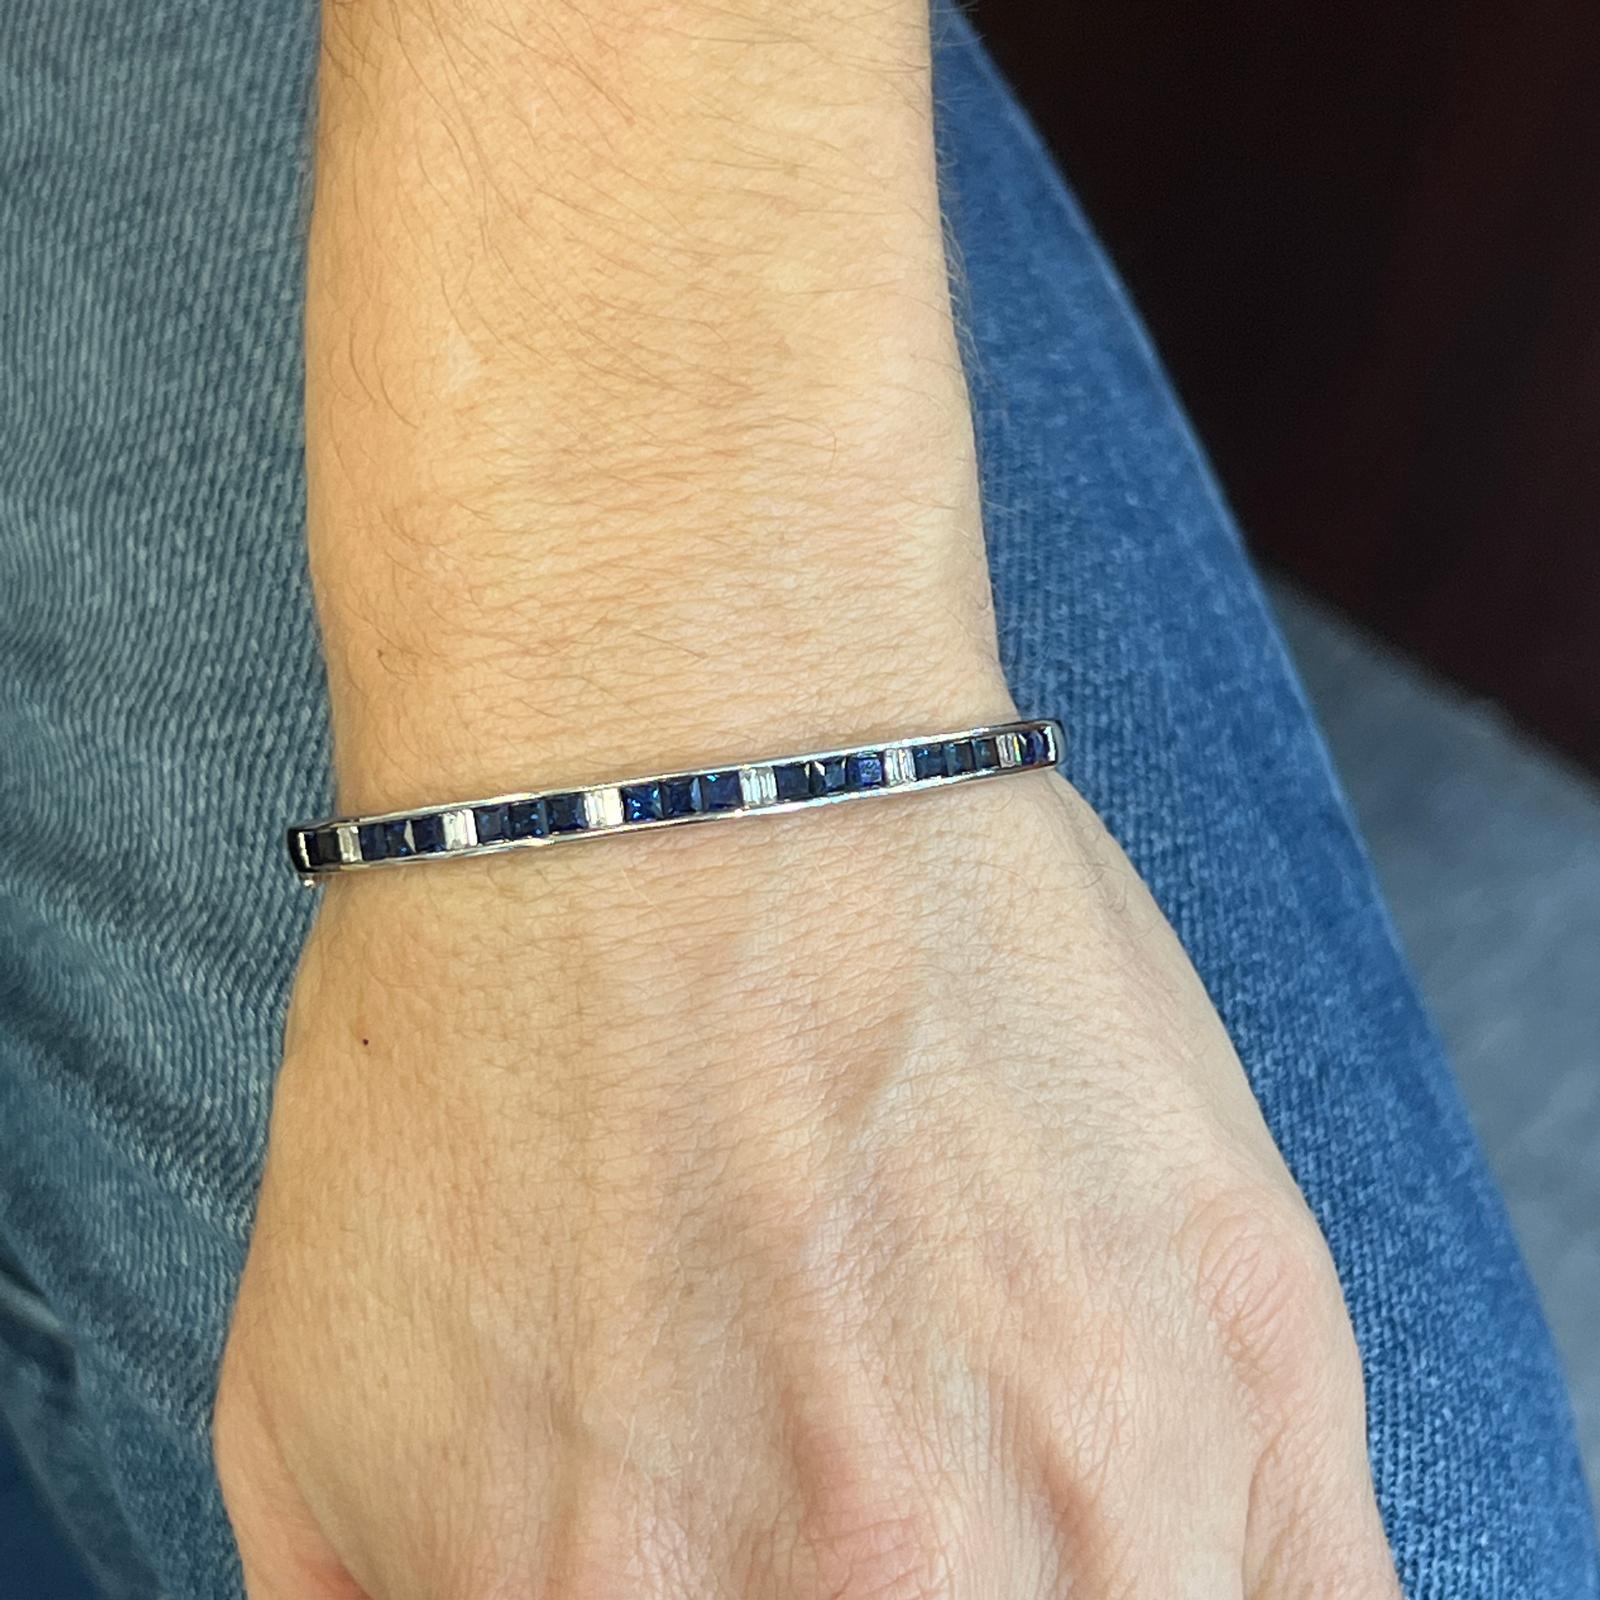 Sapphire and diamond hinged bangle bracelet fashioned in 18 karat white gold. The bangle features natural square cut sapphire gemstones weighing 3.09 carat total weight, and alternating with baguette cut diamonds weighing .36 carat total weight. The